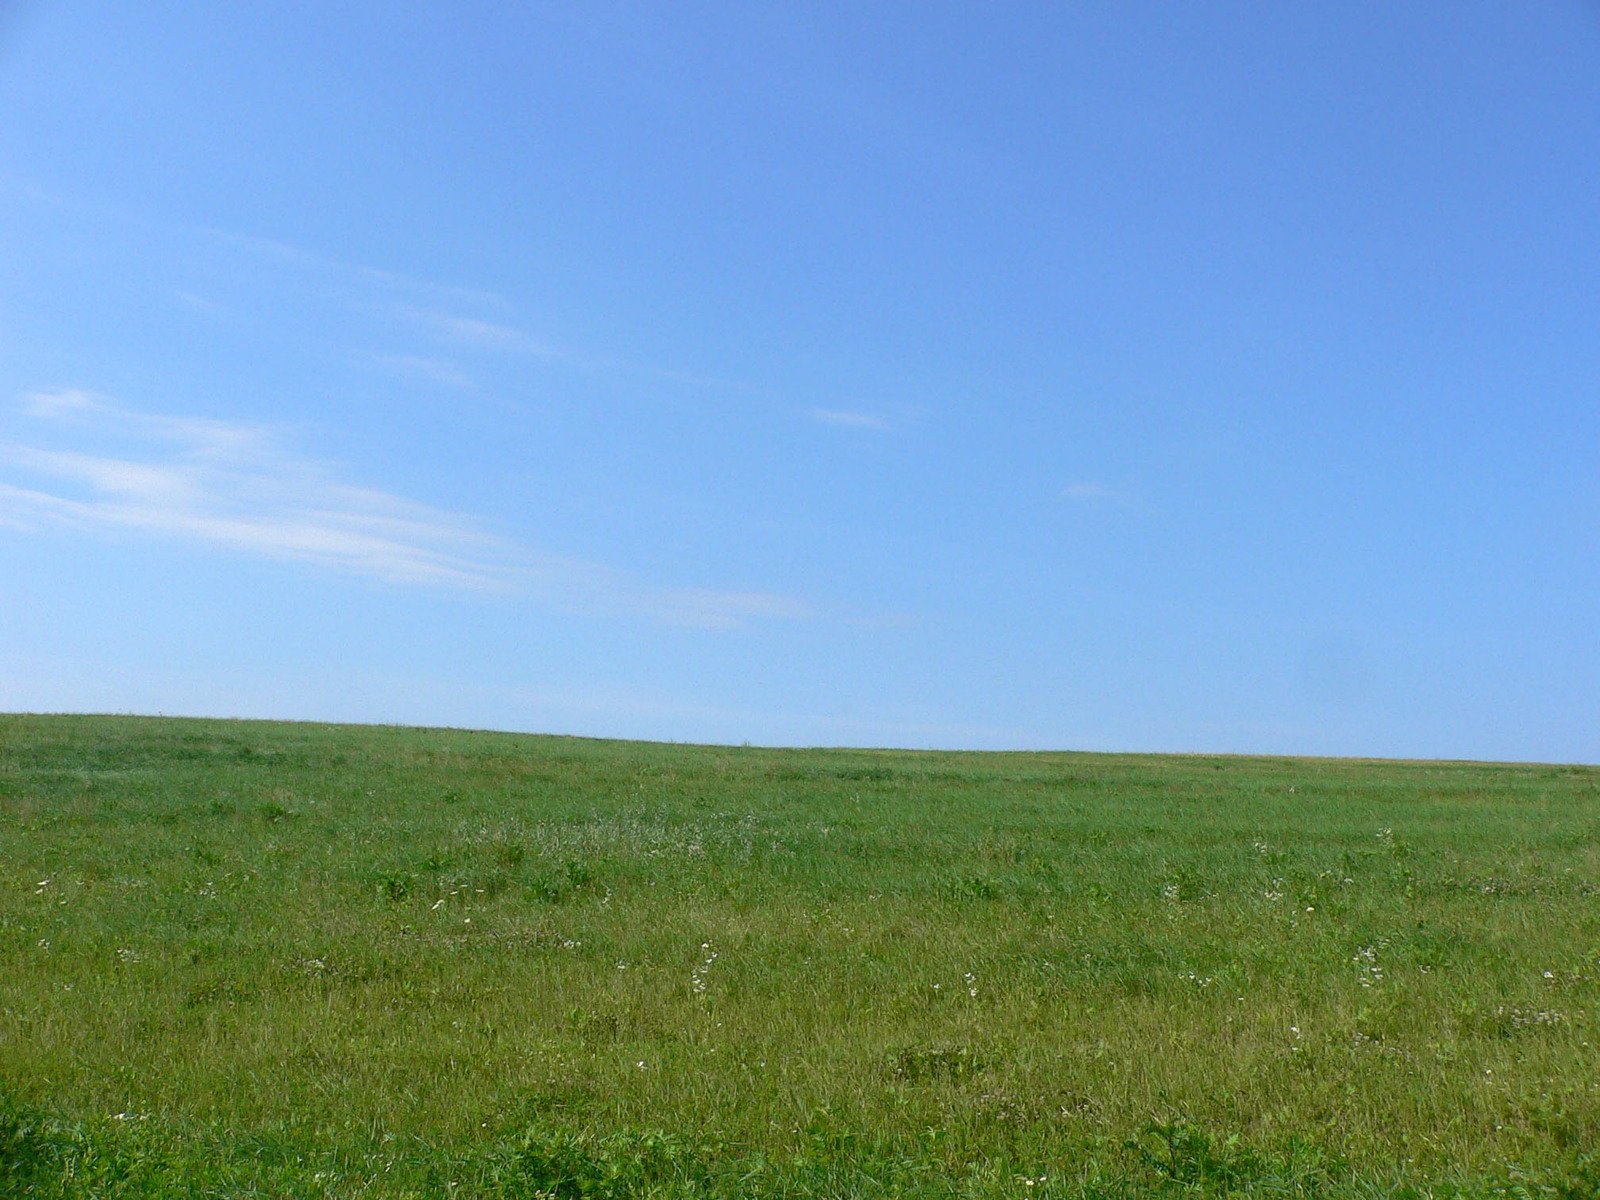 a person flying a kite over a green field